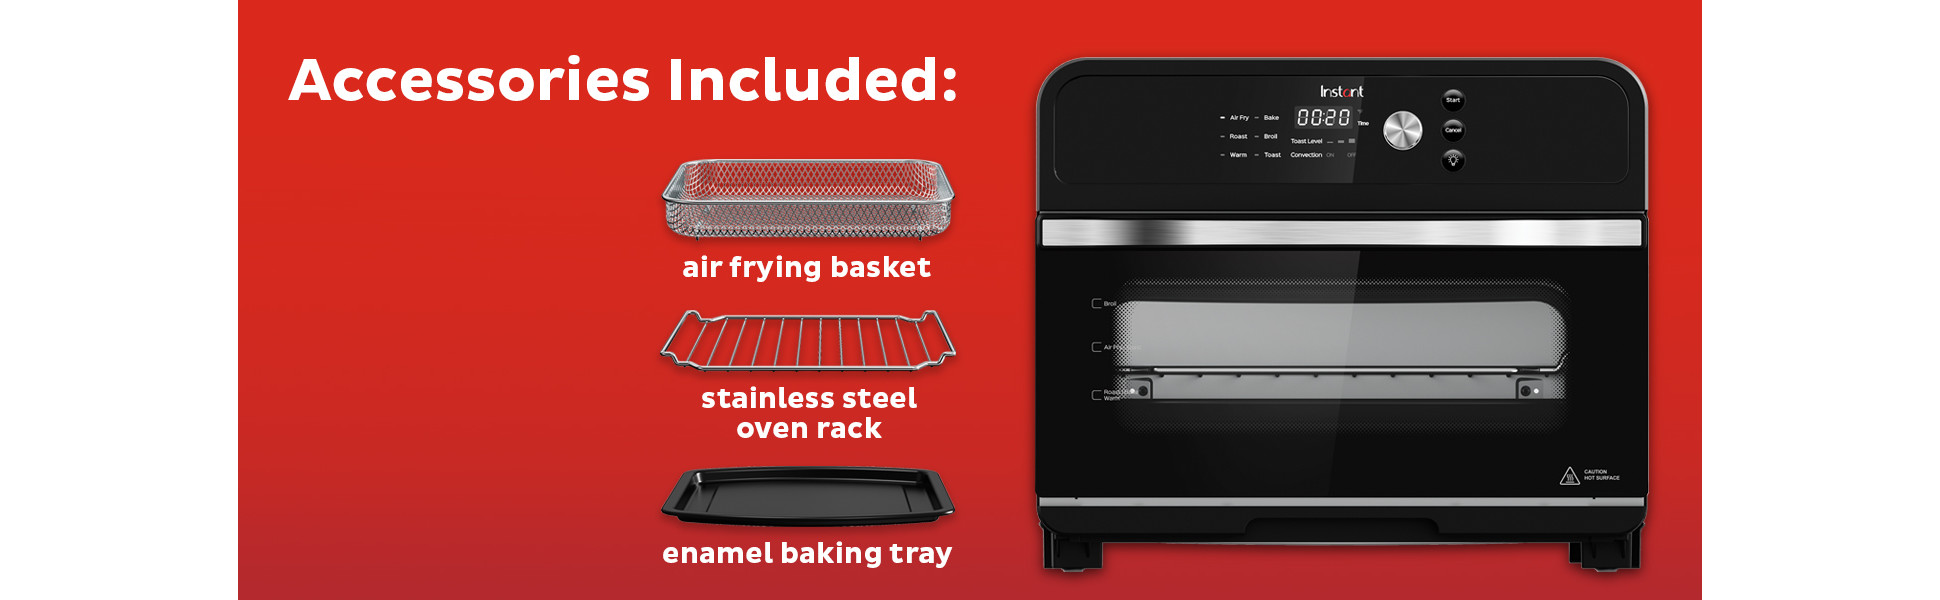 Instant™ Omni® Plus 18L Air Fryer Toaster Oven